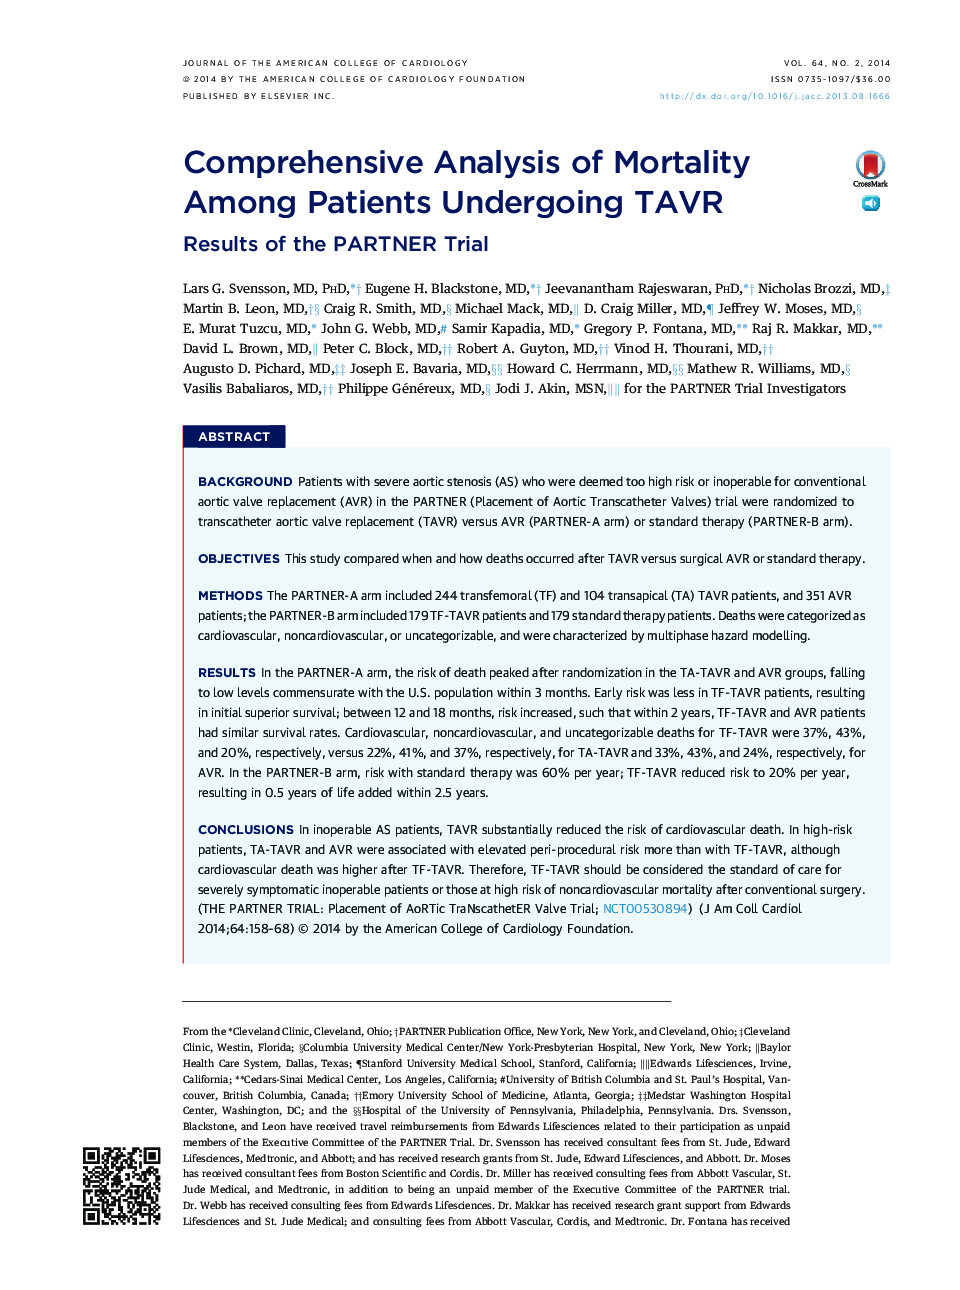 Comprehensive Analysis of Mortality Among Patients Undergoing TAVR : Results of the PARTNER Trial